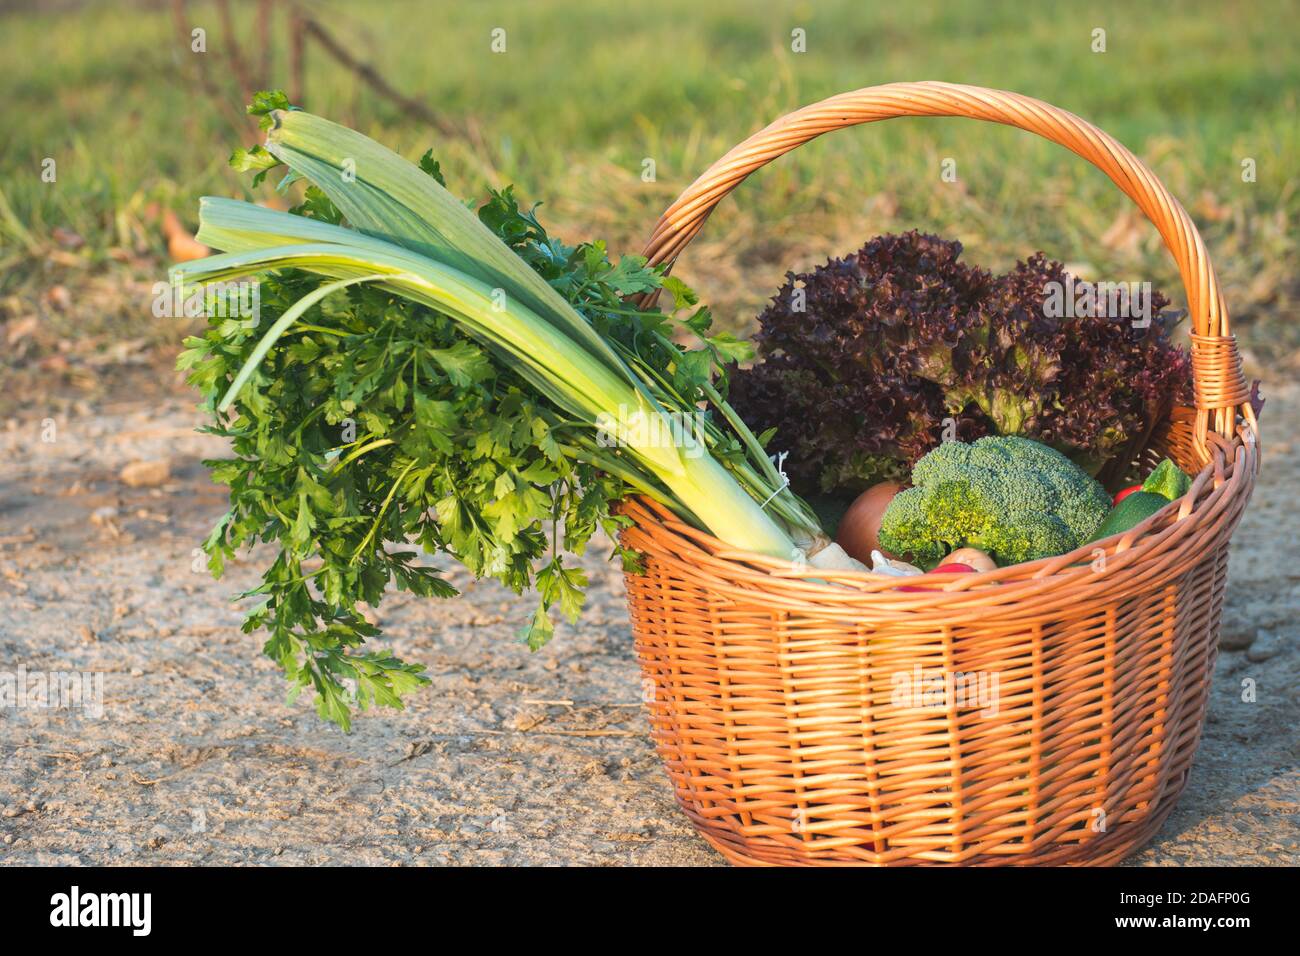 Fresh vegetables from own garden in wicker basket. Detail on harvest just collected. Local market support concept. Stock Photo